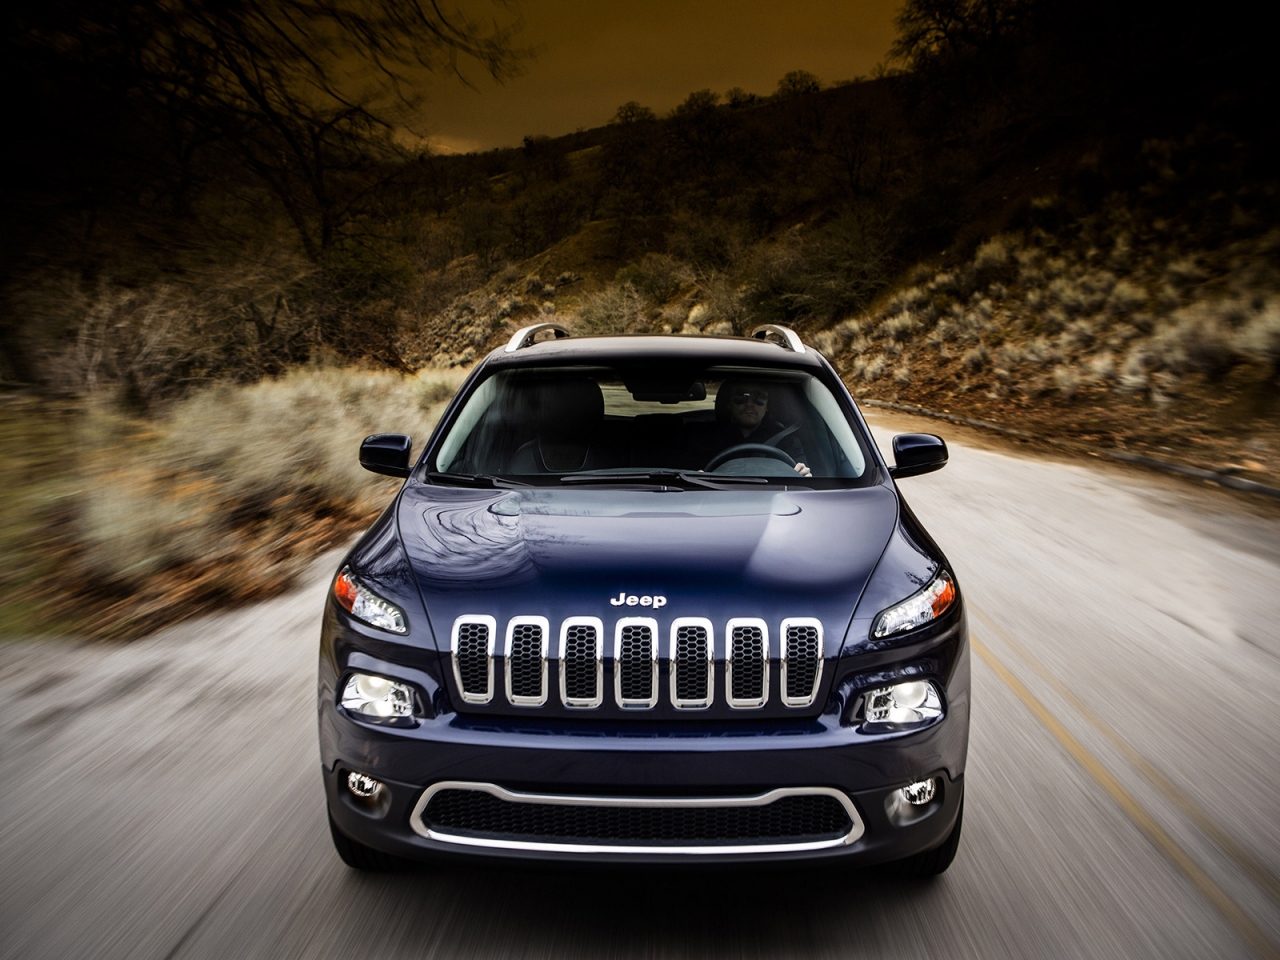 2014 Jeep Cherokee for 1280 x 960 resolution